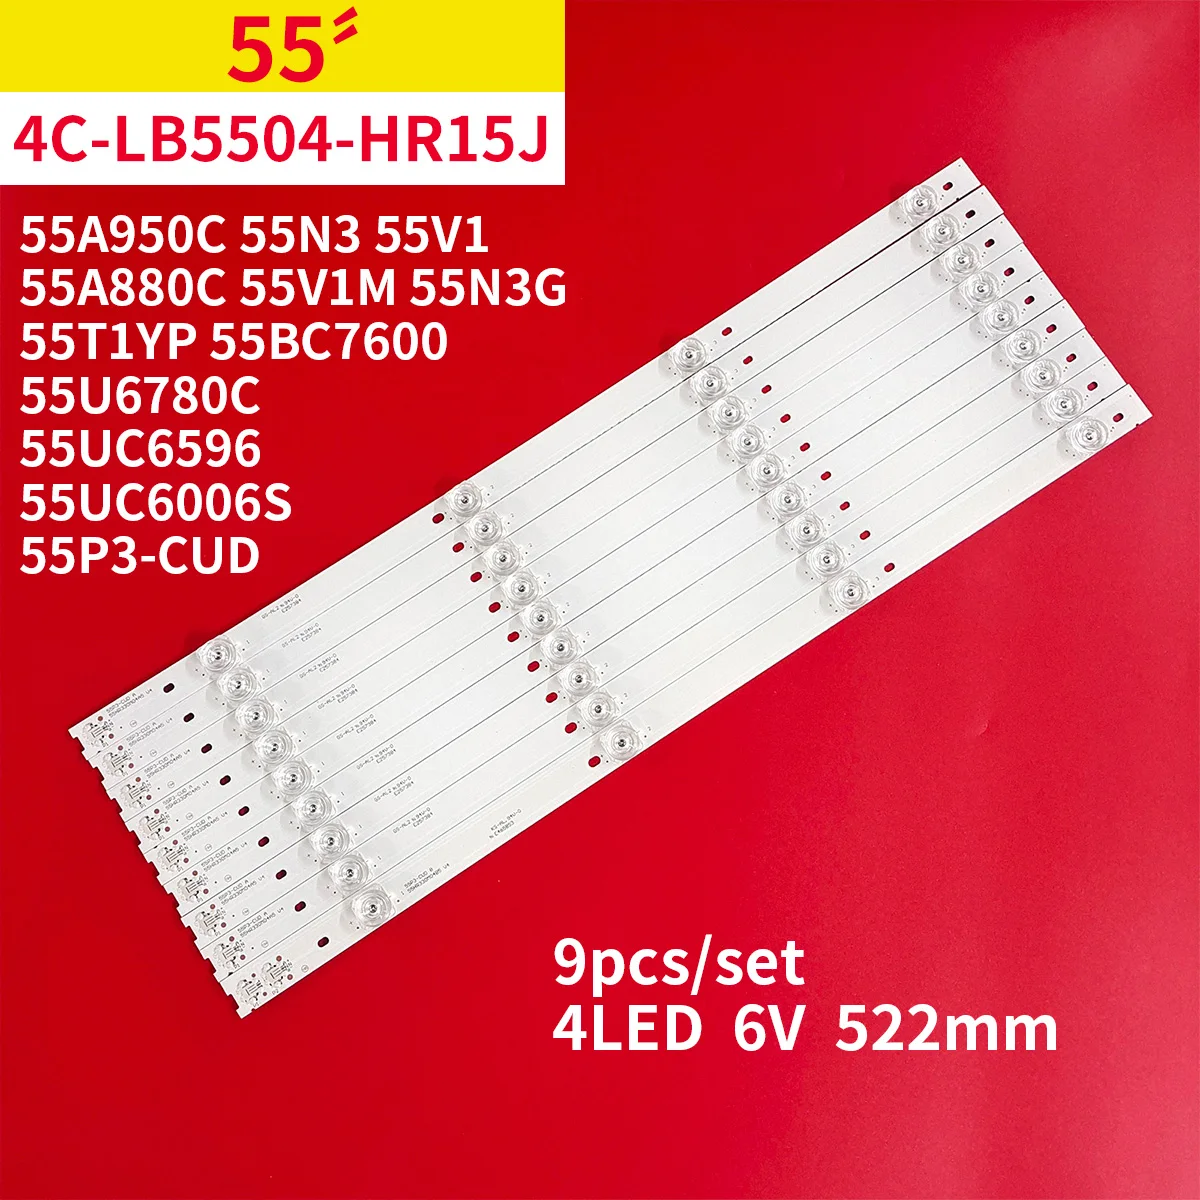 Led Backlight Strip 4 Lamps for TCL Thomson 55UC6586 55A950C 55A880C 55N3 55P3F 55P3-CUD 55HR330M04A5 v4 4C-LB5504-HR15J